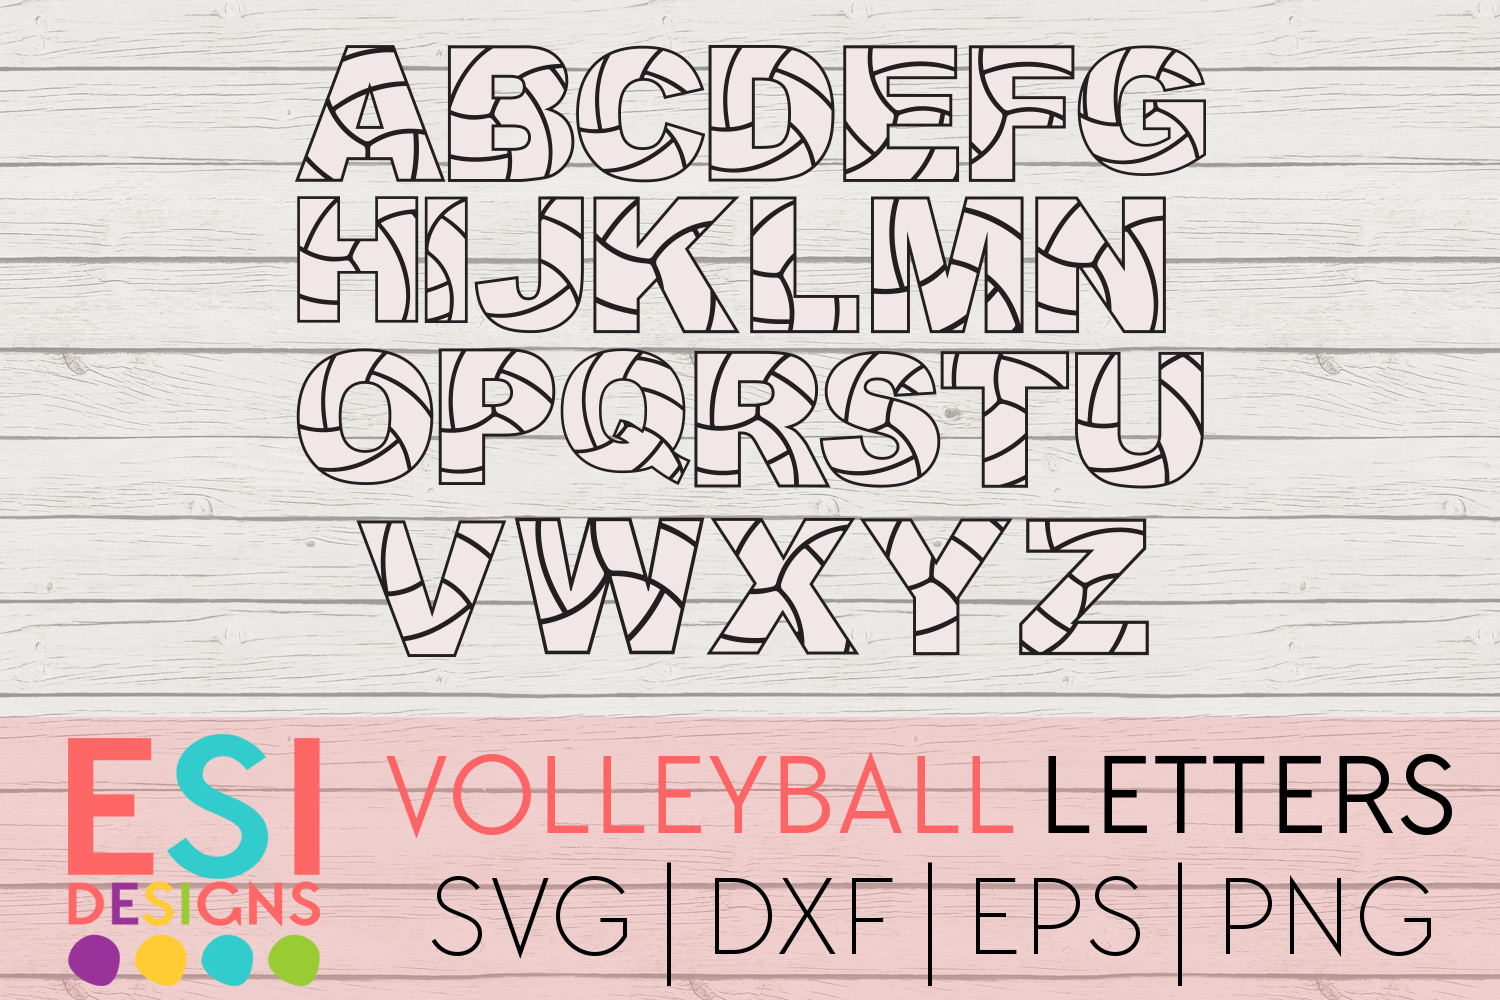 Download Volleyball Letters - Full A-Z Alphabet | SVG DXF EPS PNG